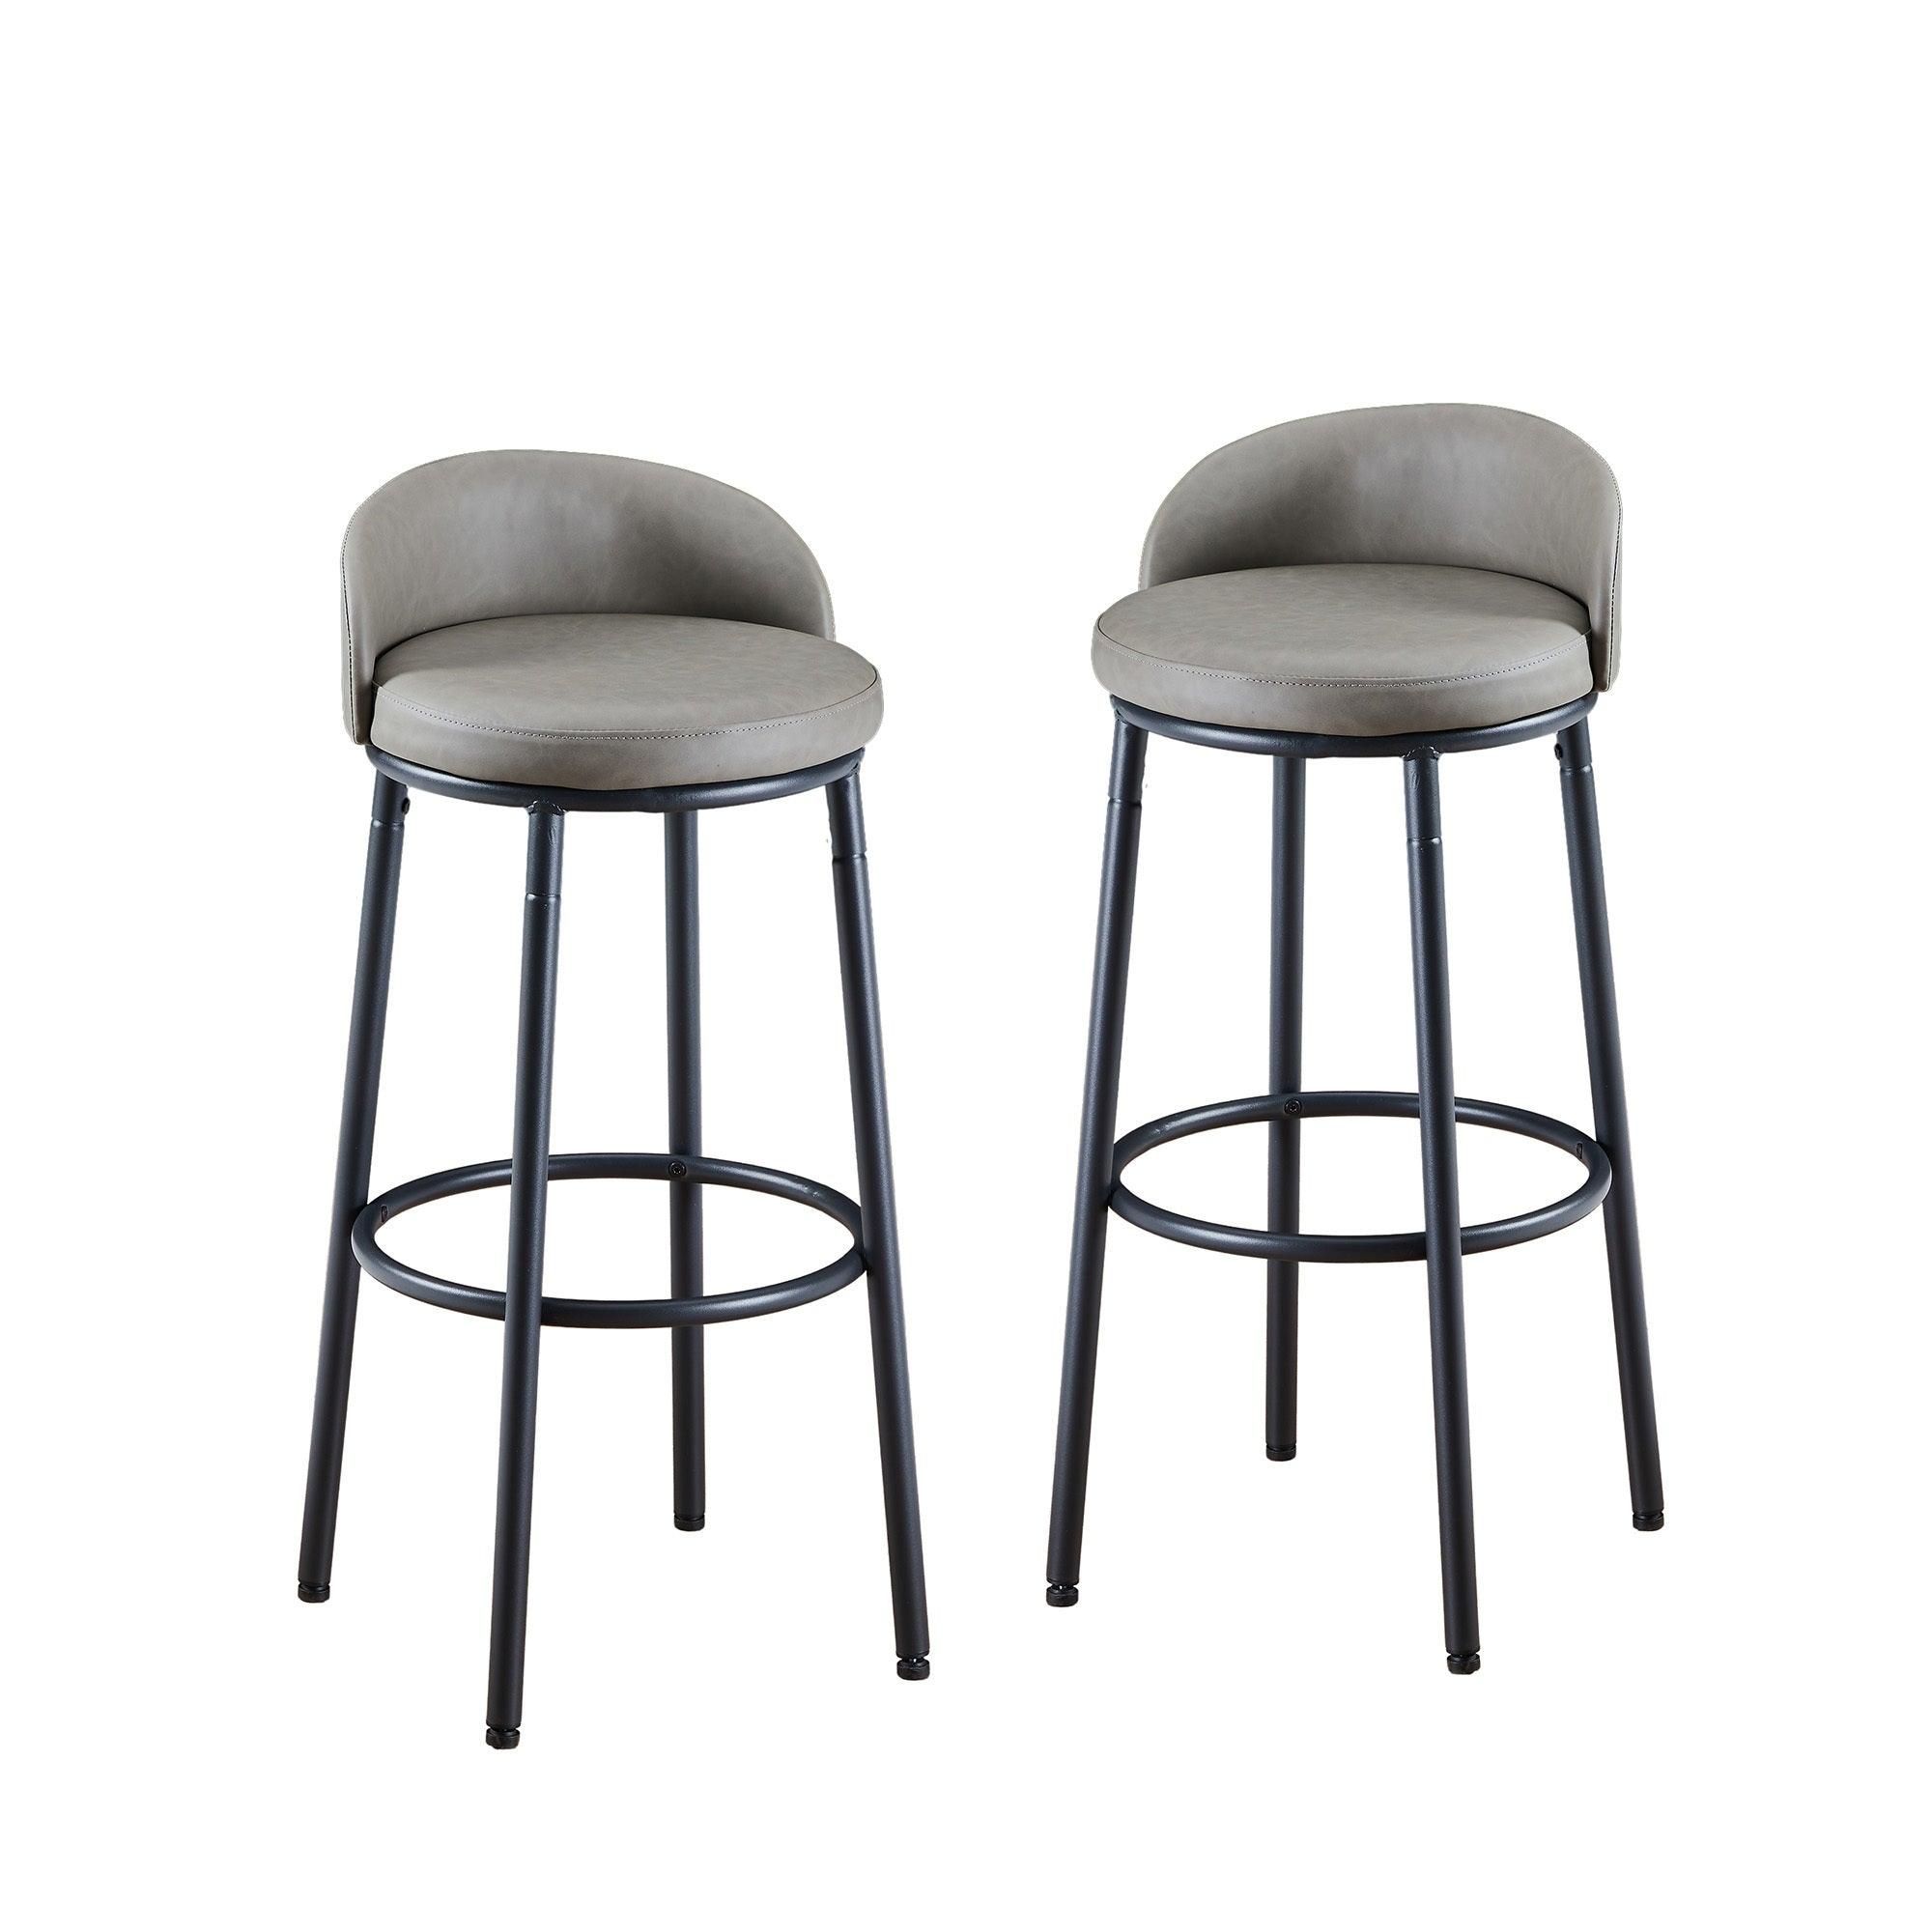 🆓🚛 Set Of 2 Bar Stools 29.3" W/ Back & Footrest for Kitchen Counter & Bar - Gray